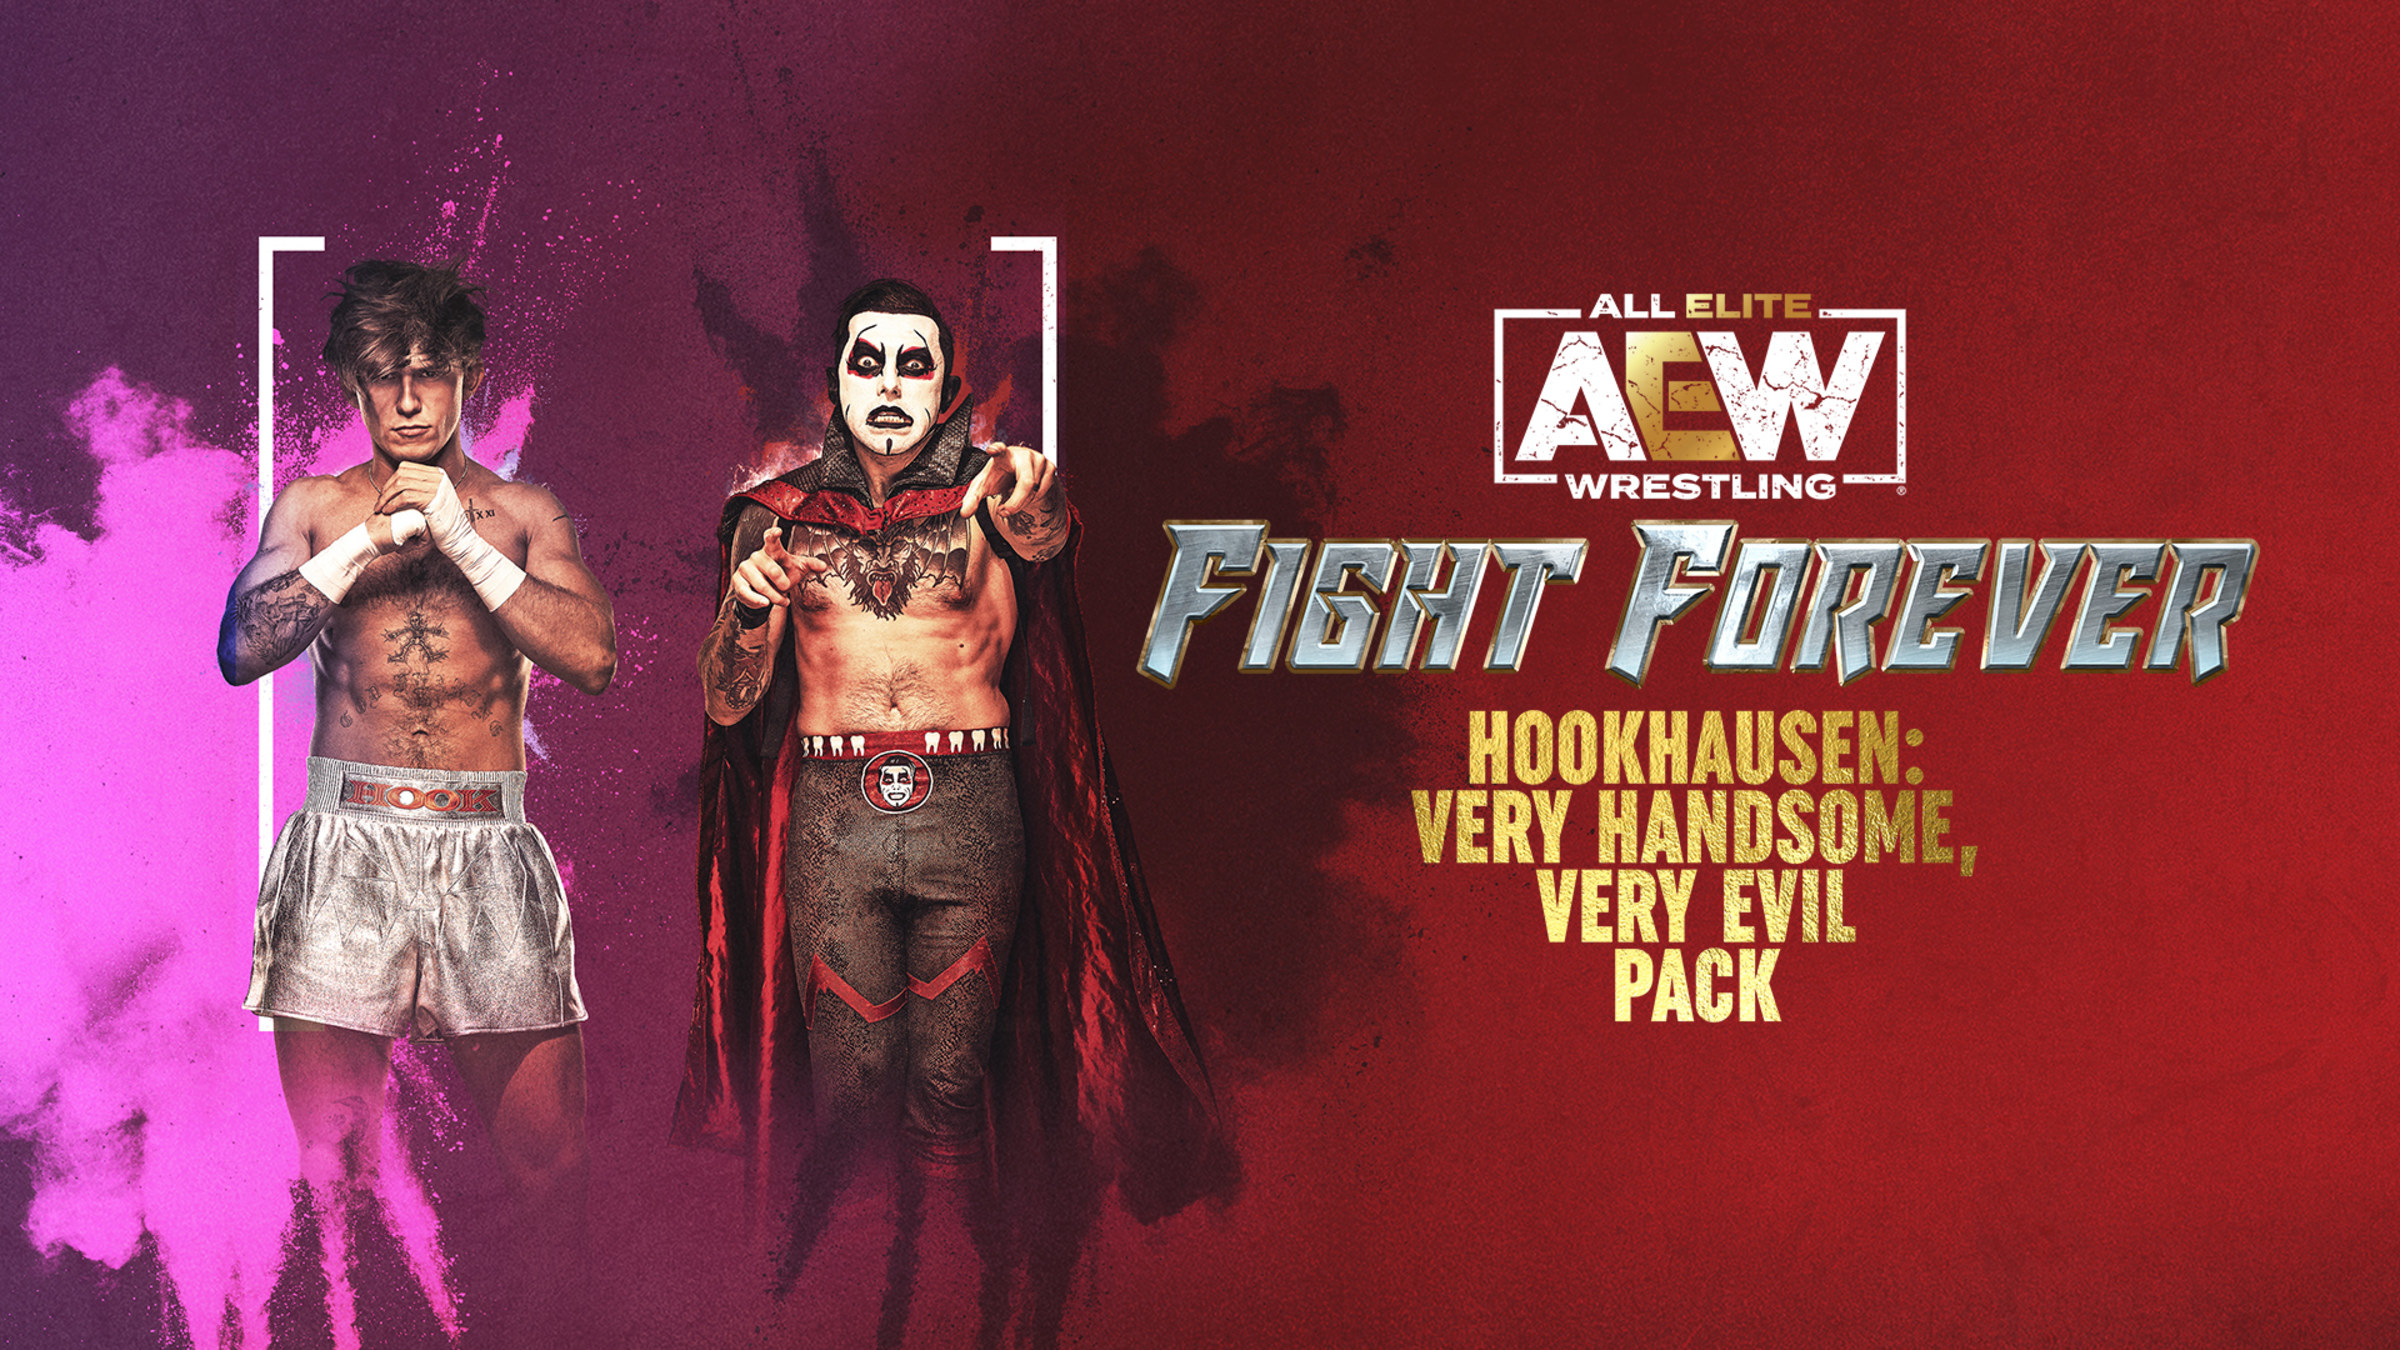 AEW: Fight Forever Hookhausen: Very Handsome, Very Evil Pack for